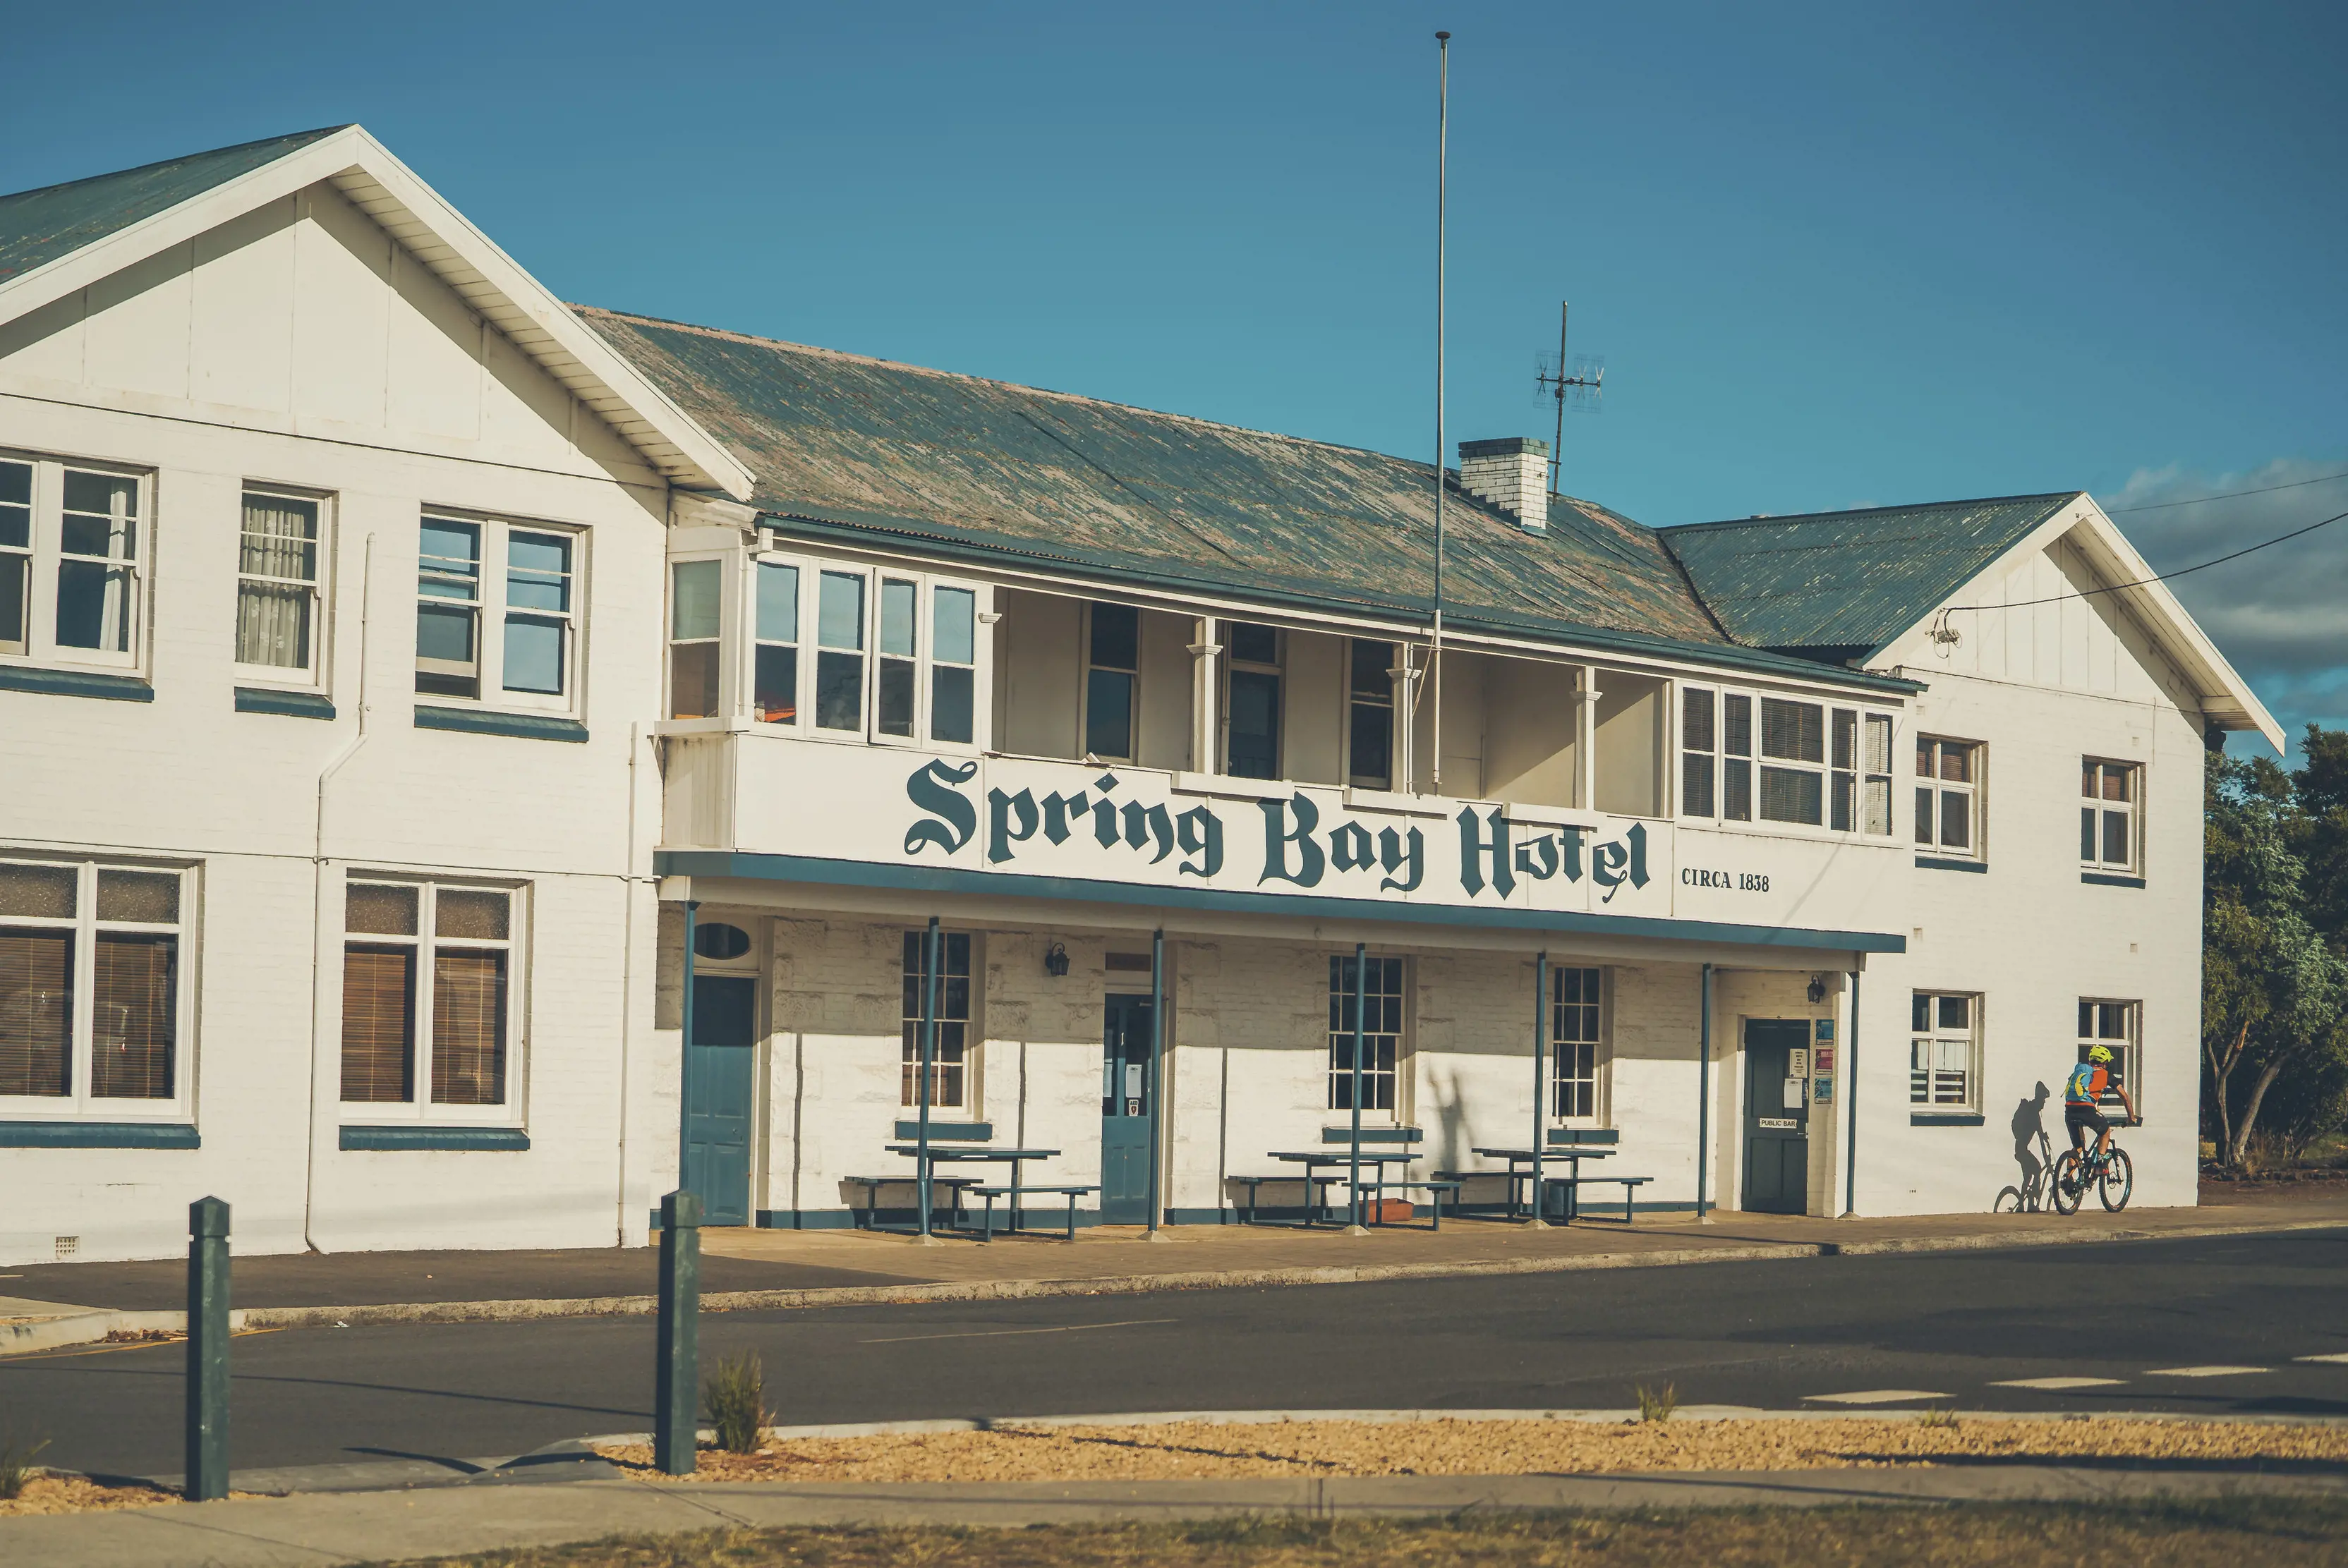 Exterior of Spring Bay Hotel, with signage painted on the hotel front. A cyclist rides past.